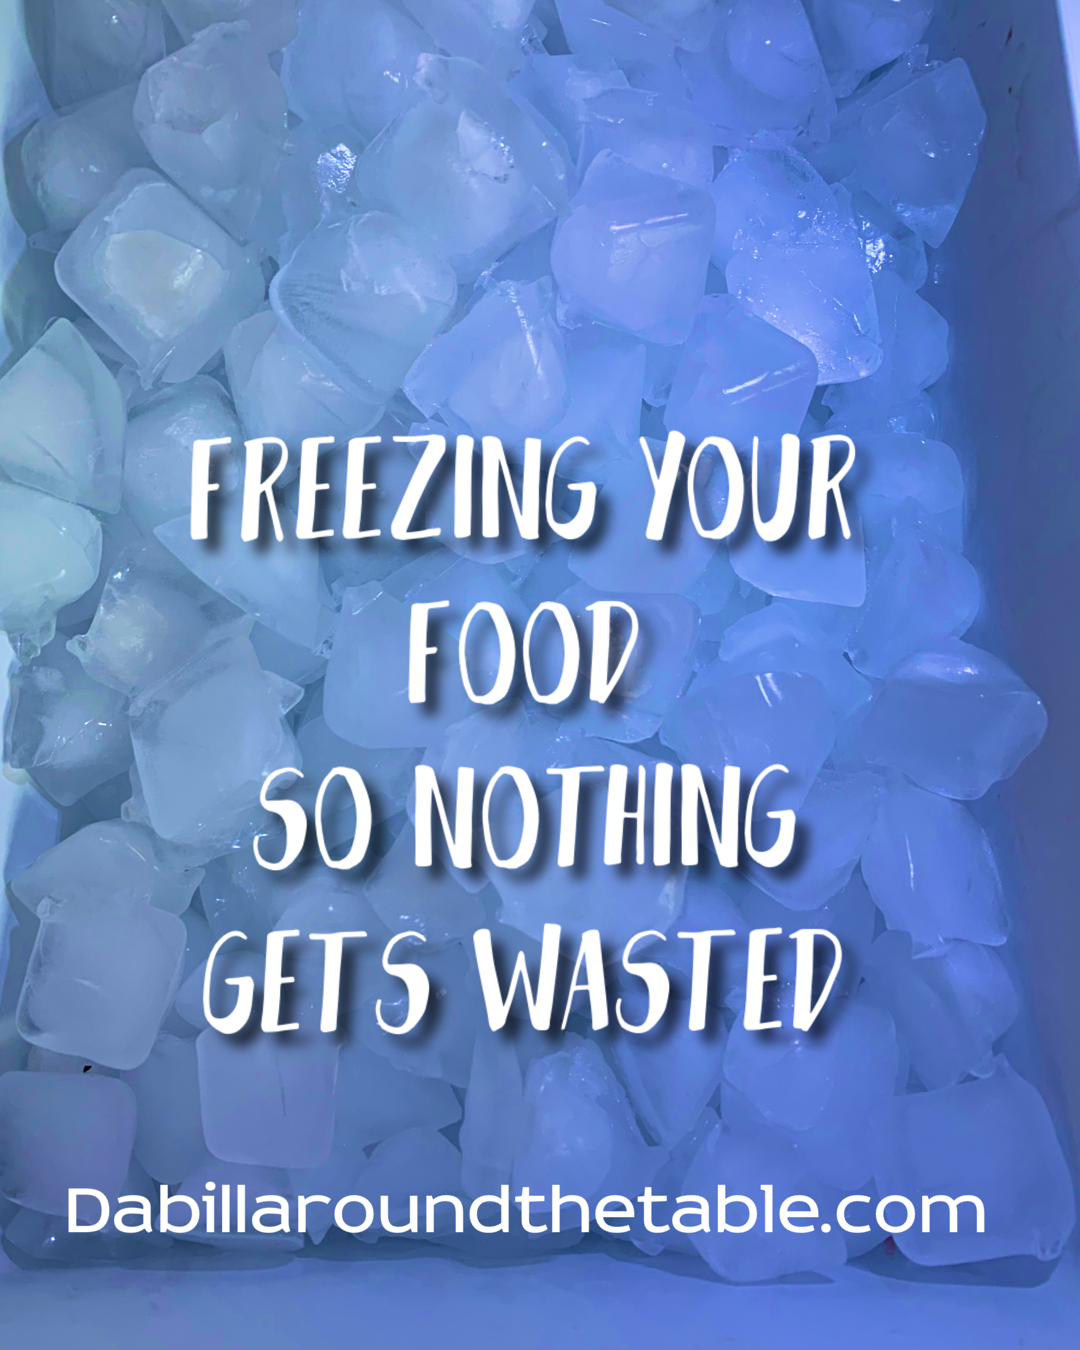 Freeze your food so nothing gets wasted